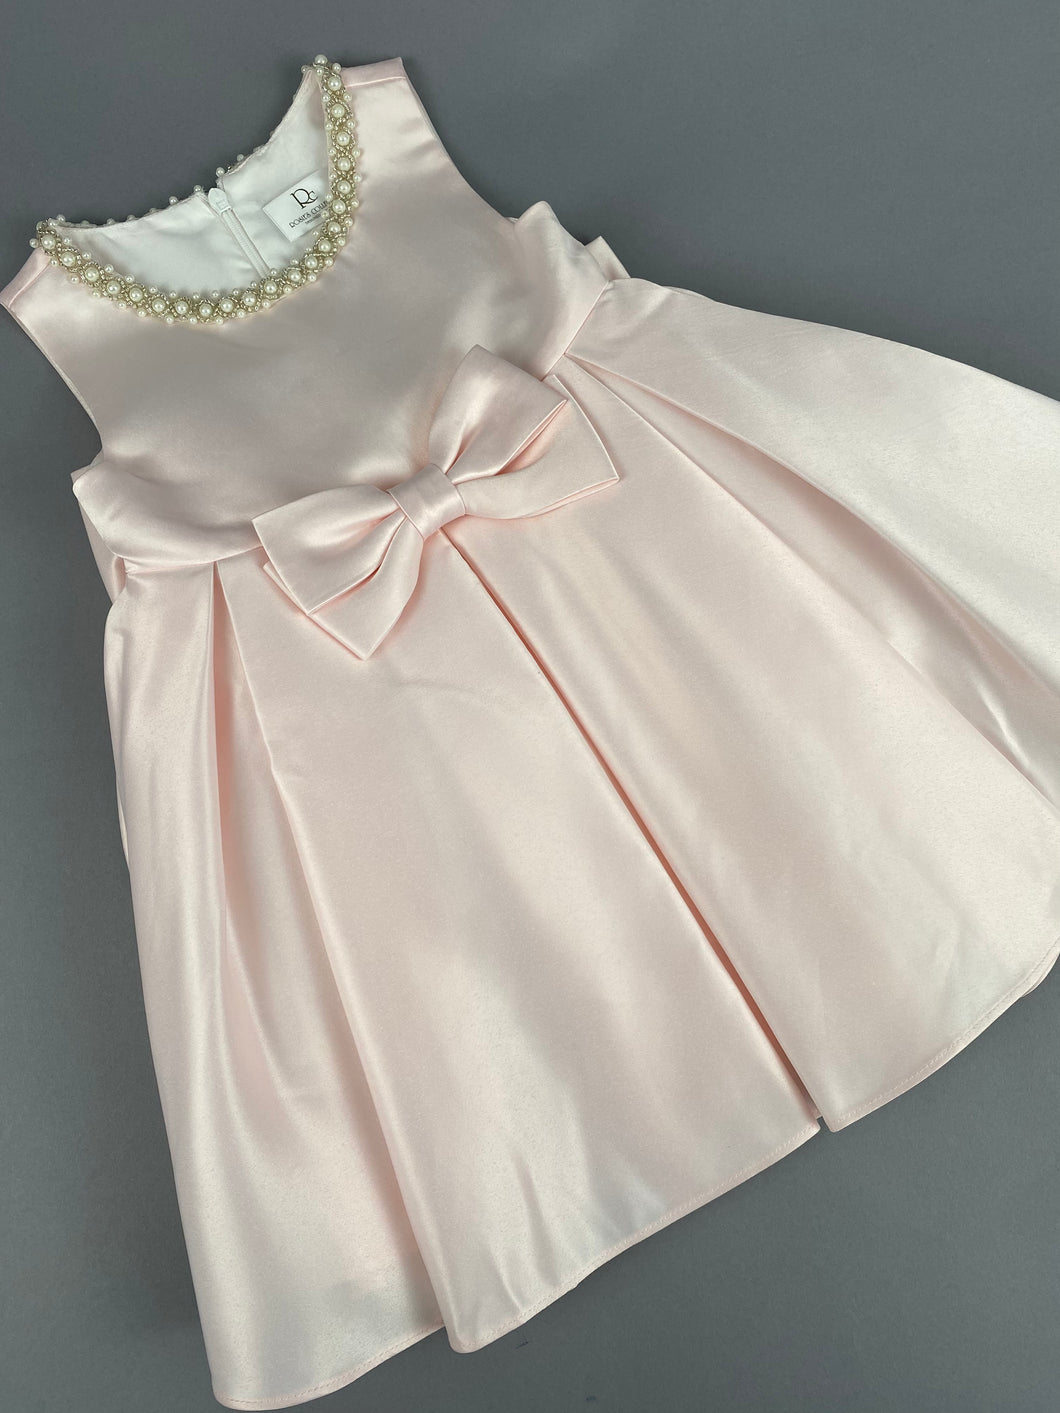 Dress 102 Girls Baptismal Christening Sleeveless Soft Pink Satin Dress with Pearl Neckline and Matching Balero. Made exclusively for Rosies Collections